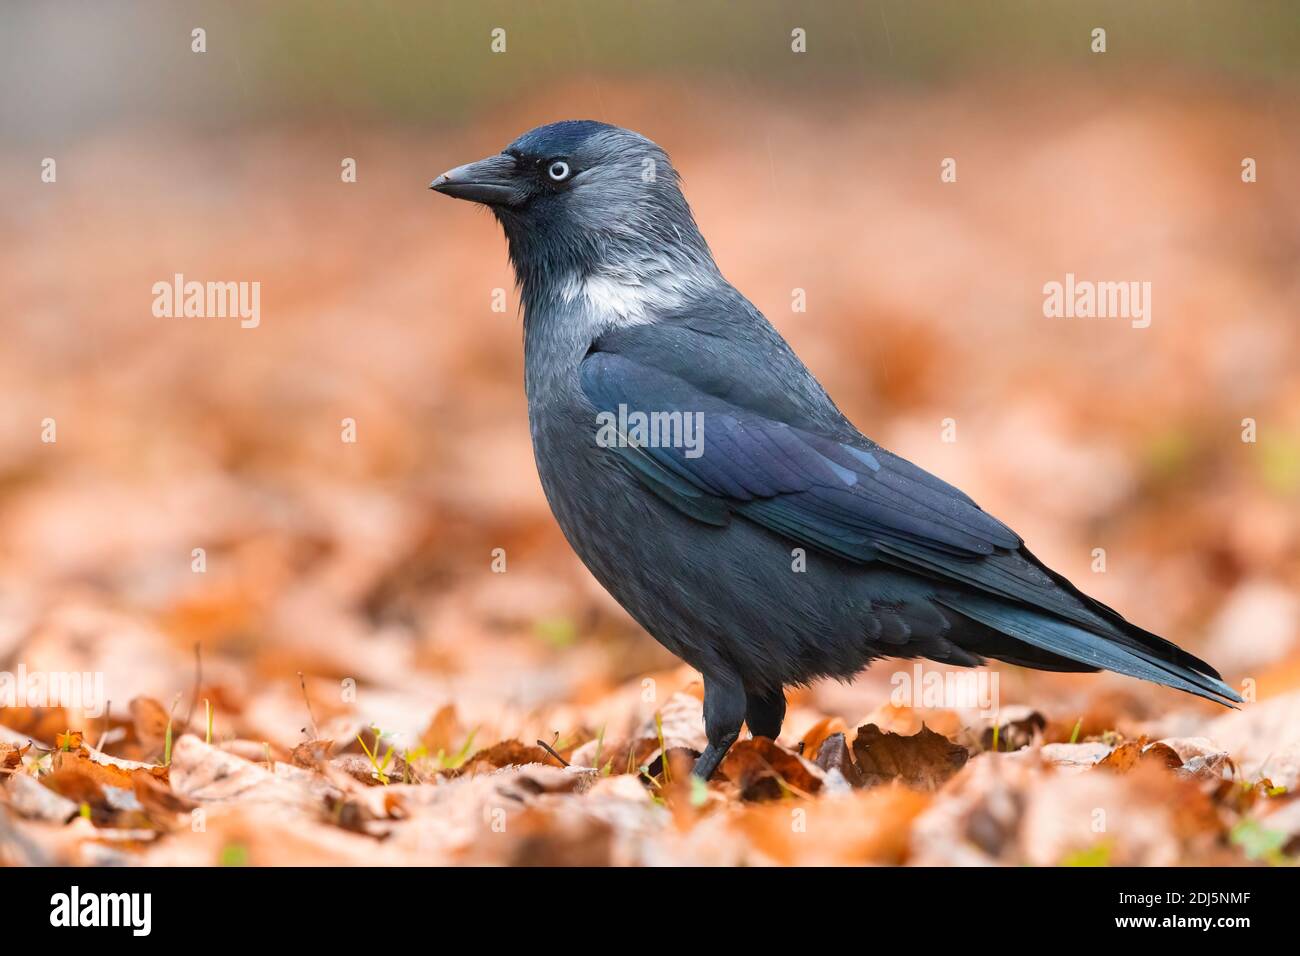 Western Jackdaw (Coloeus monedula), side view of an adult standing on the ground, Mazovian Voivodeship, Poland Stock Photo